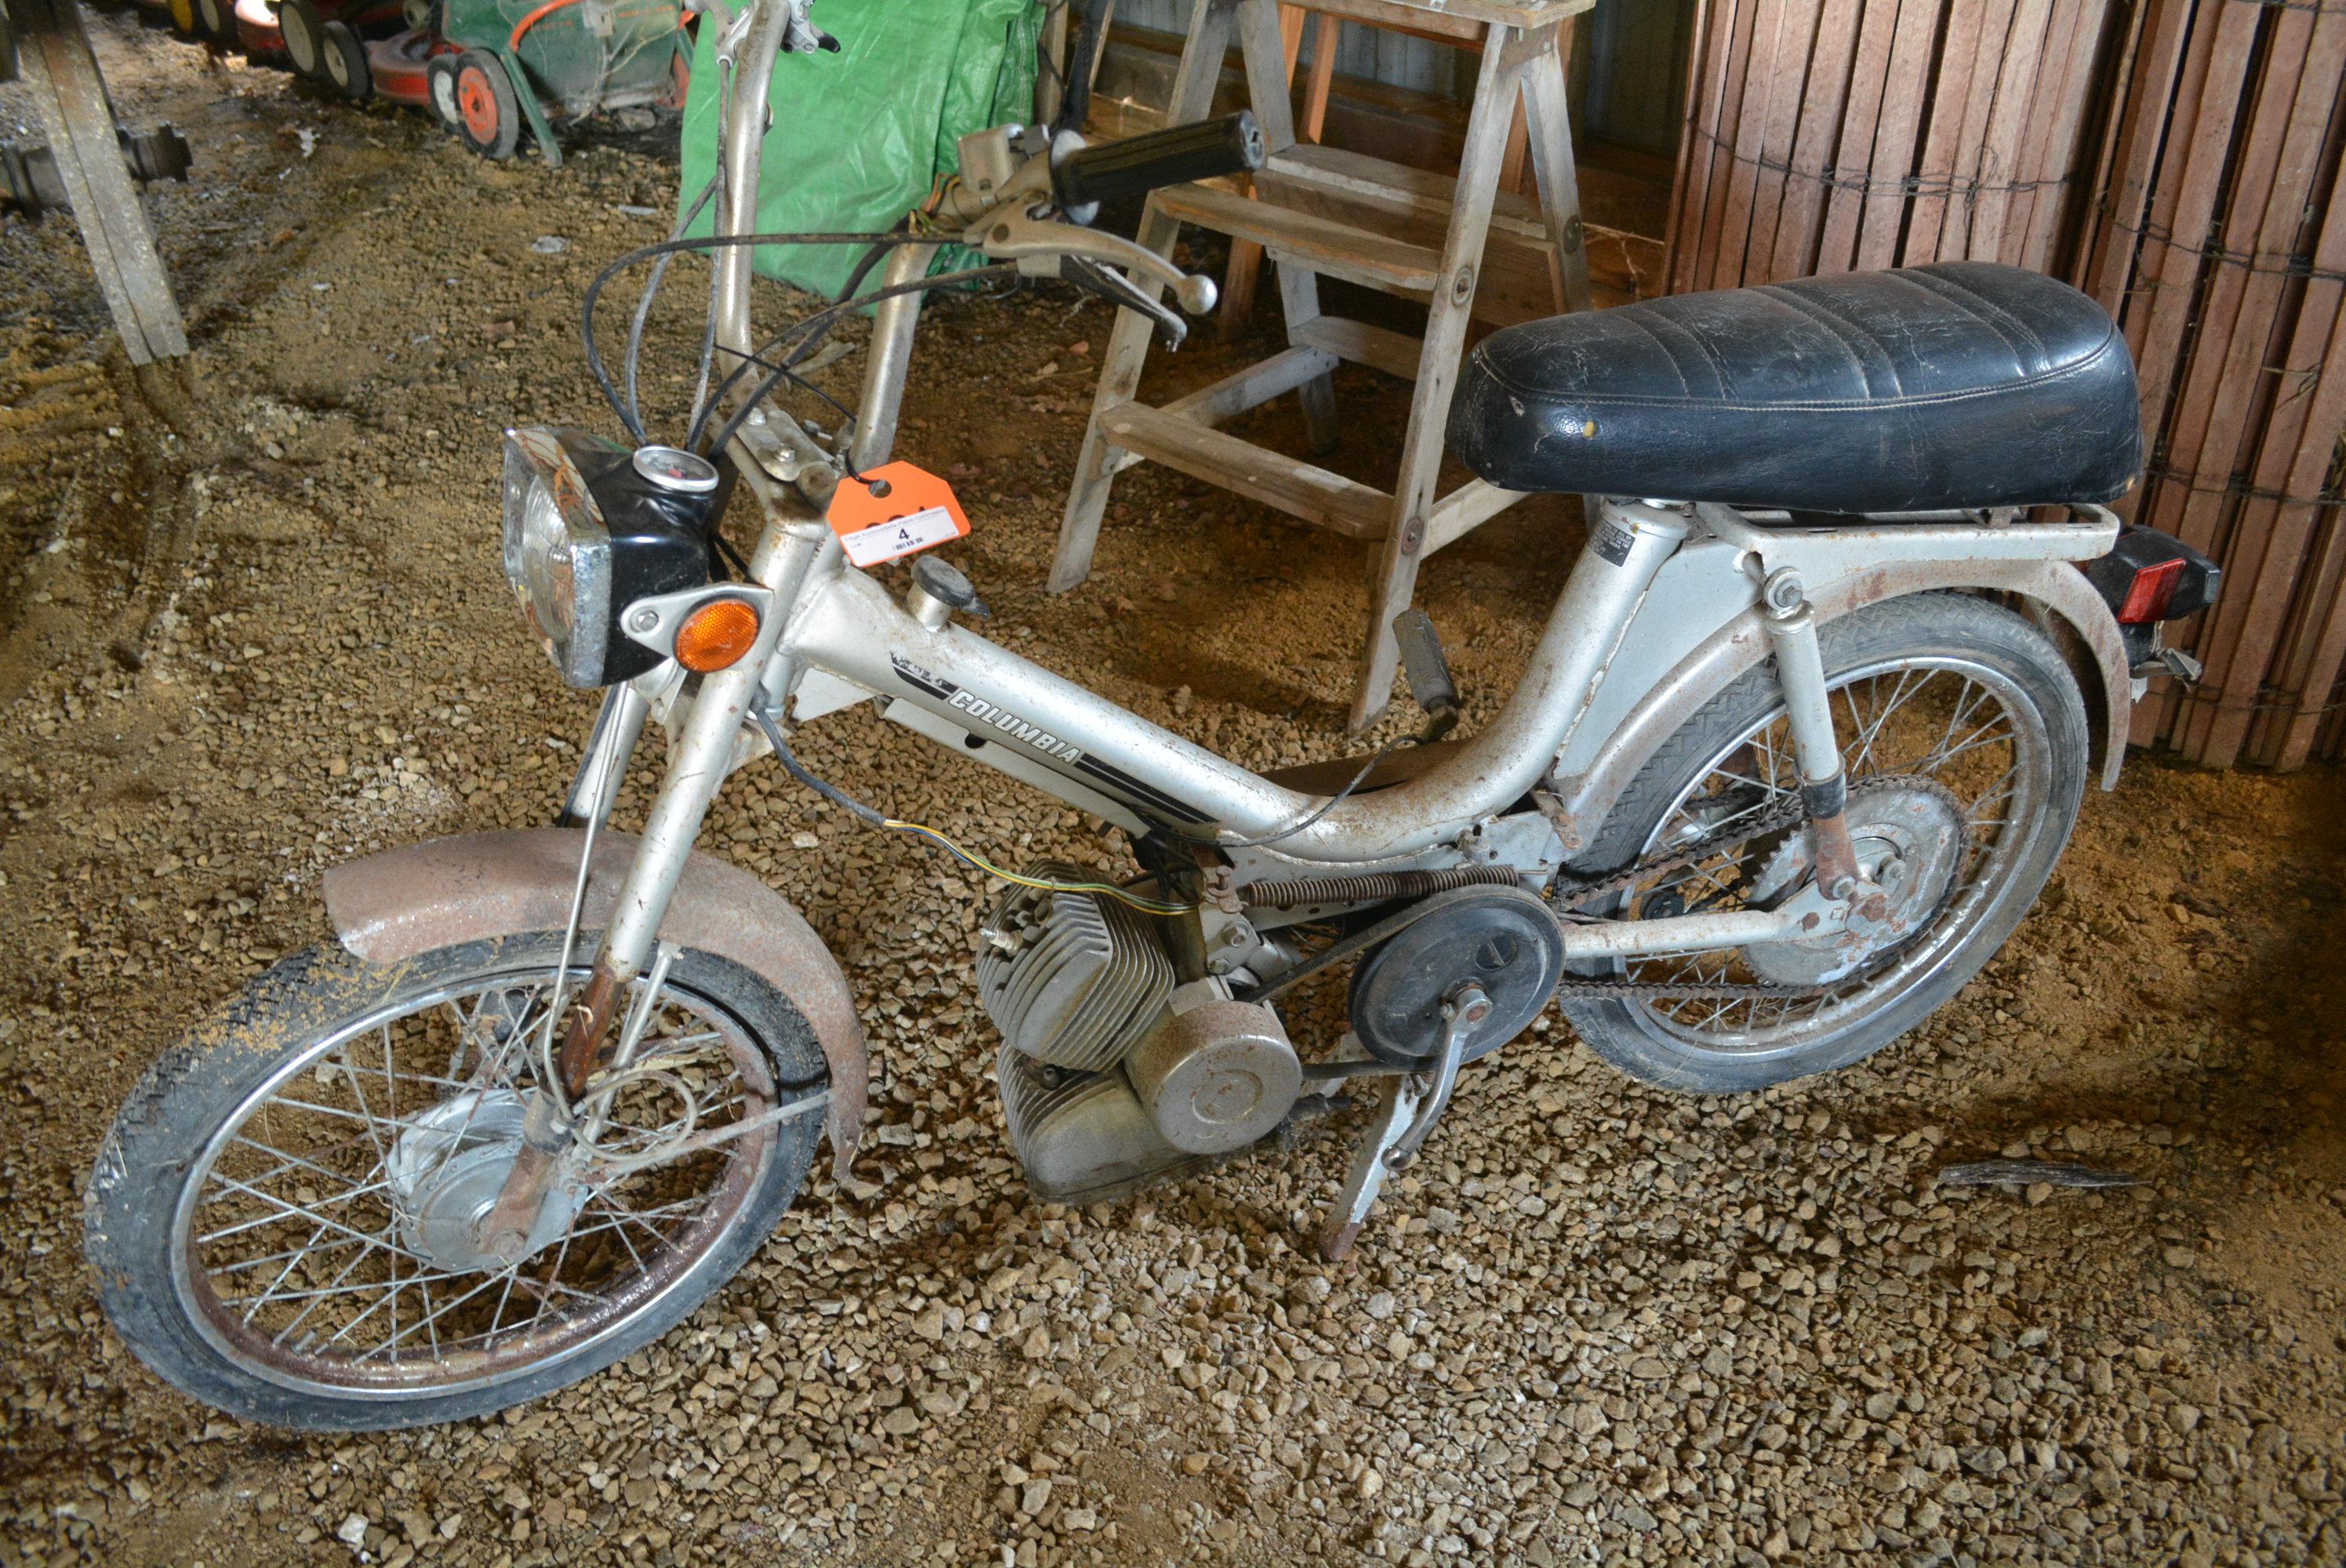 Columbia motorized mini bike/scooter, shows 0407 miles, has not been ran recently, might need carb w